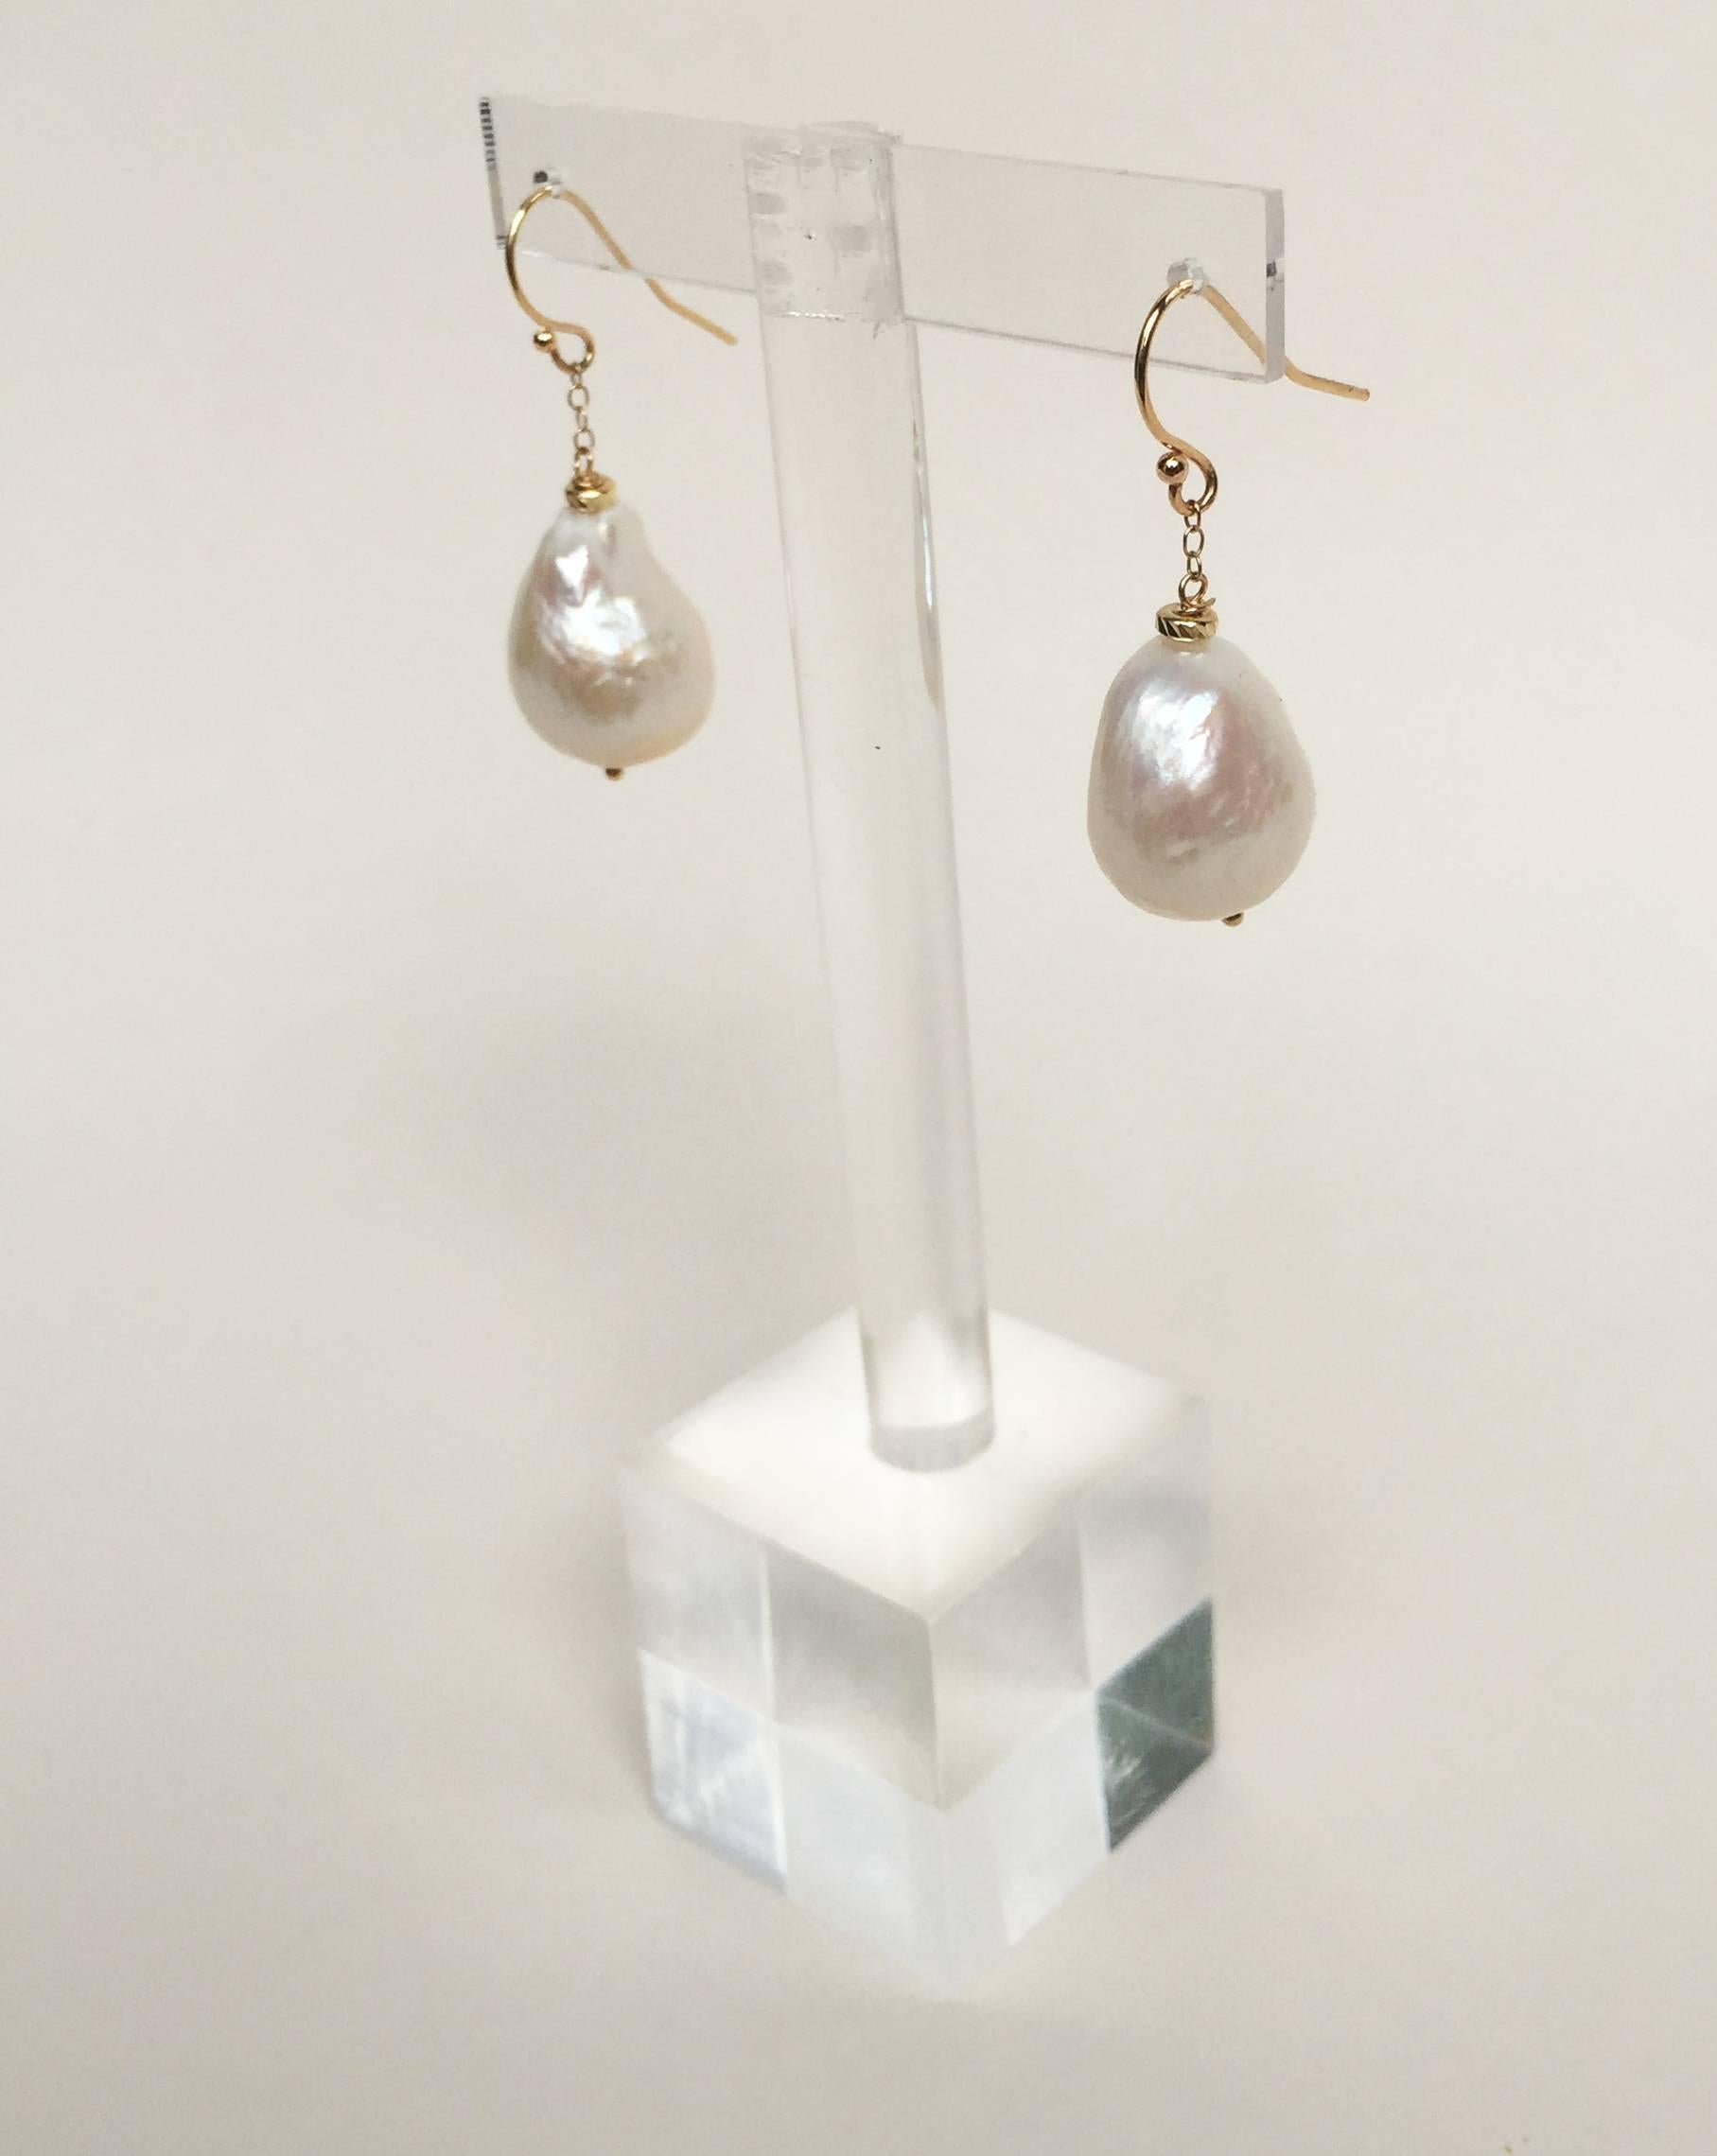 The raw baroque pearl (9mm x 7mm) hangs from a 14k yellow gold chain, accentuated by a 14k yellow gold hook. The earrings are 1.4 inches long, the perfect length to highlight the bone structure of the face. These classic earrings pair well with